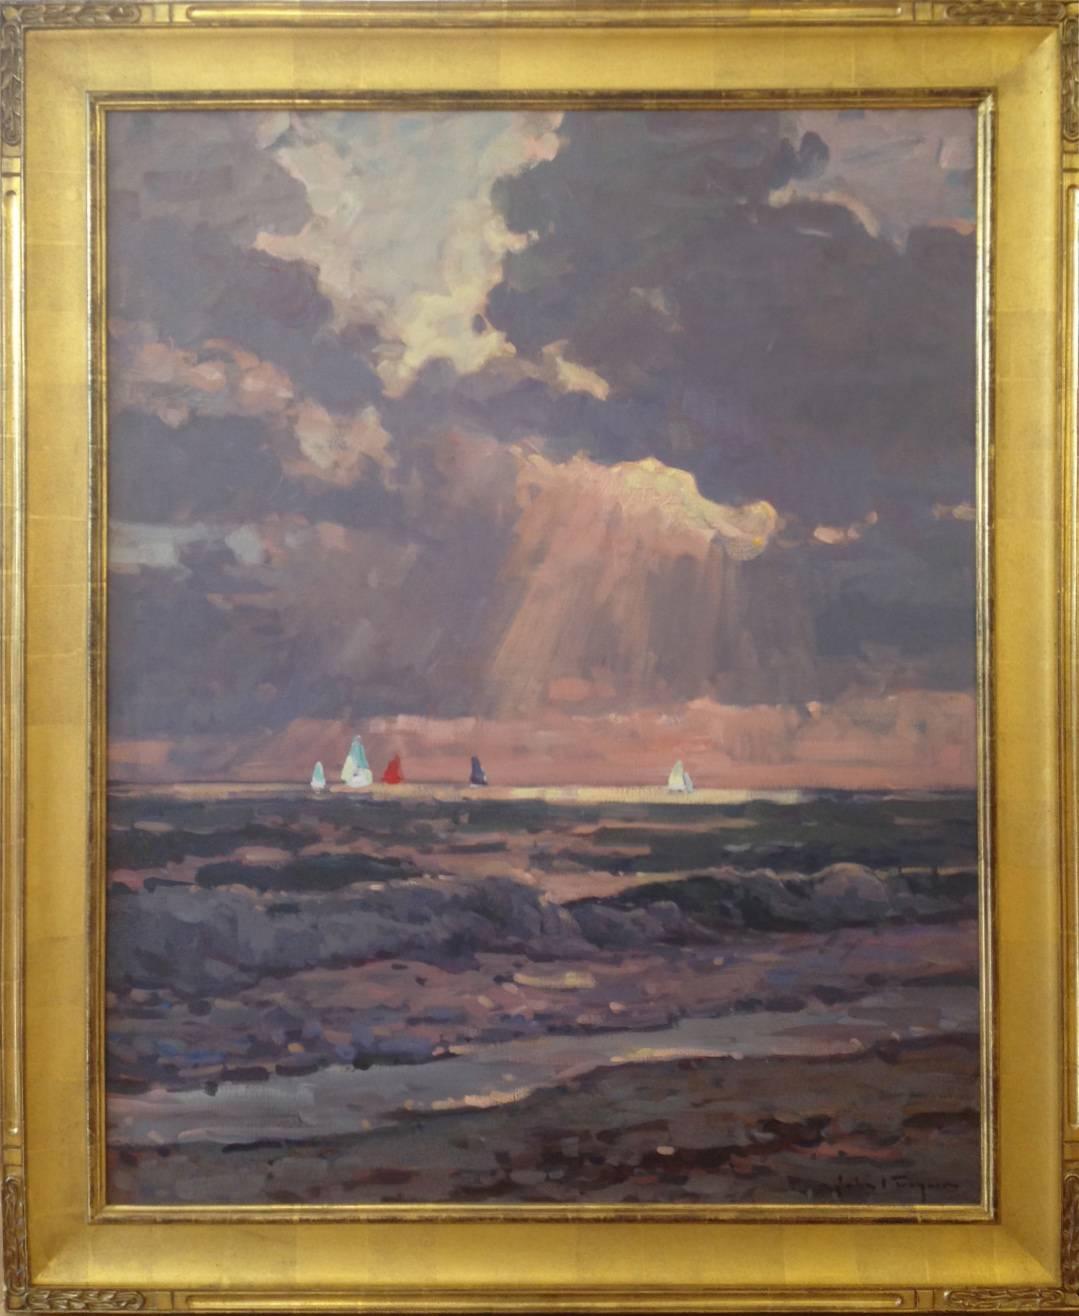 Seascape, ocean, water, waves, sail boats, clouds, sun, white, red, blue

John C. Traynor's painting style is reminiscent of some 19th century painters and sometimes the Dutch Masters. He uses his knowledge of light and color to create a certain